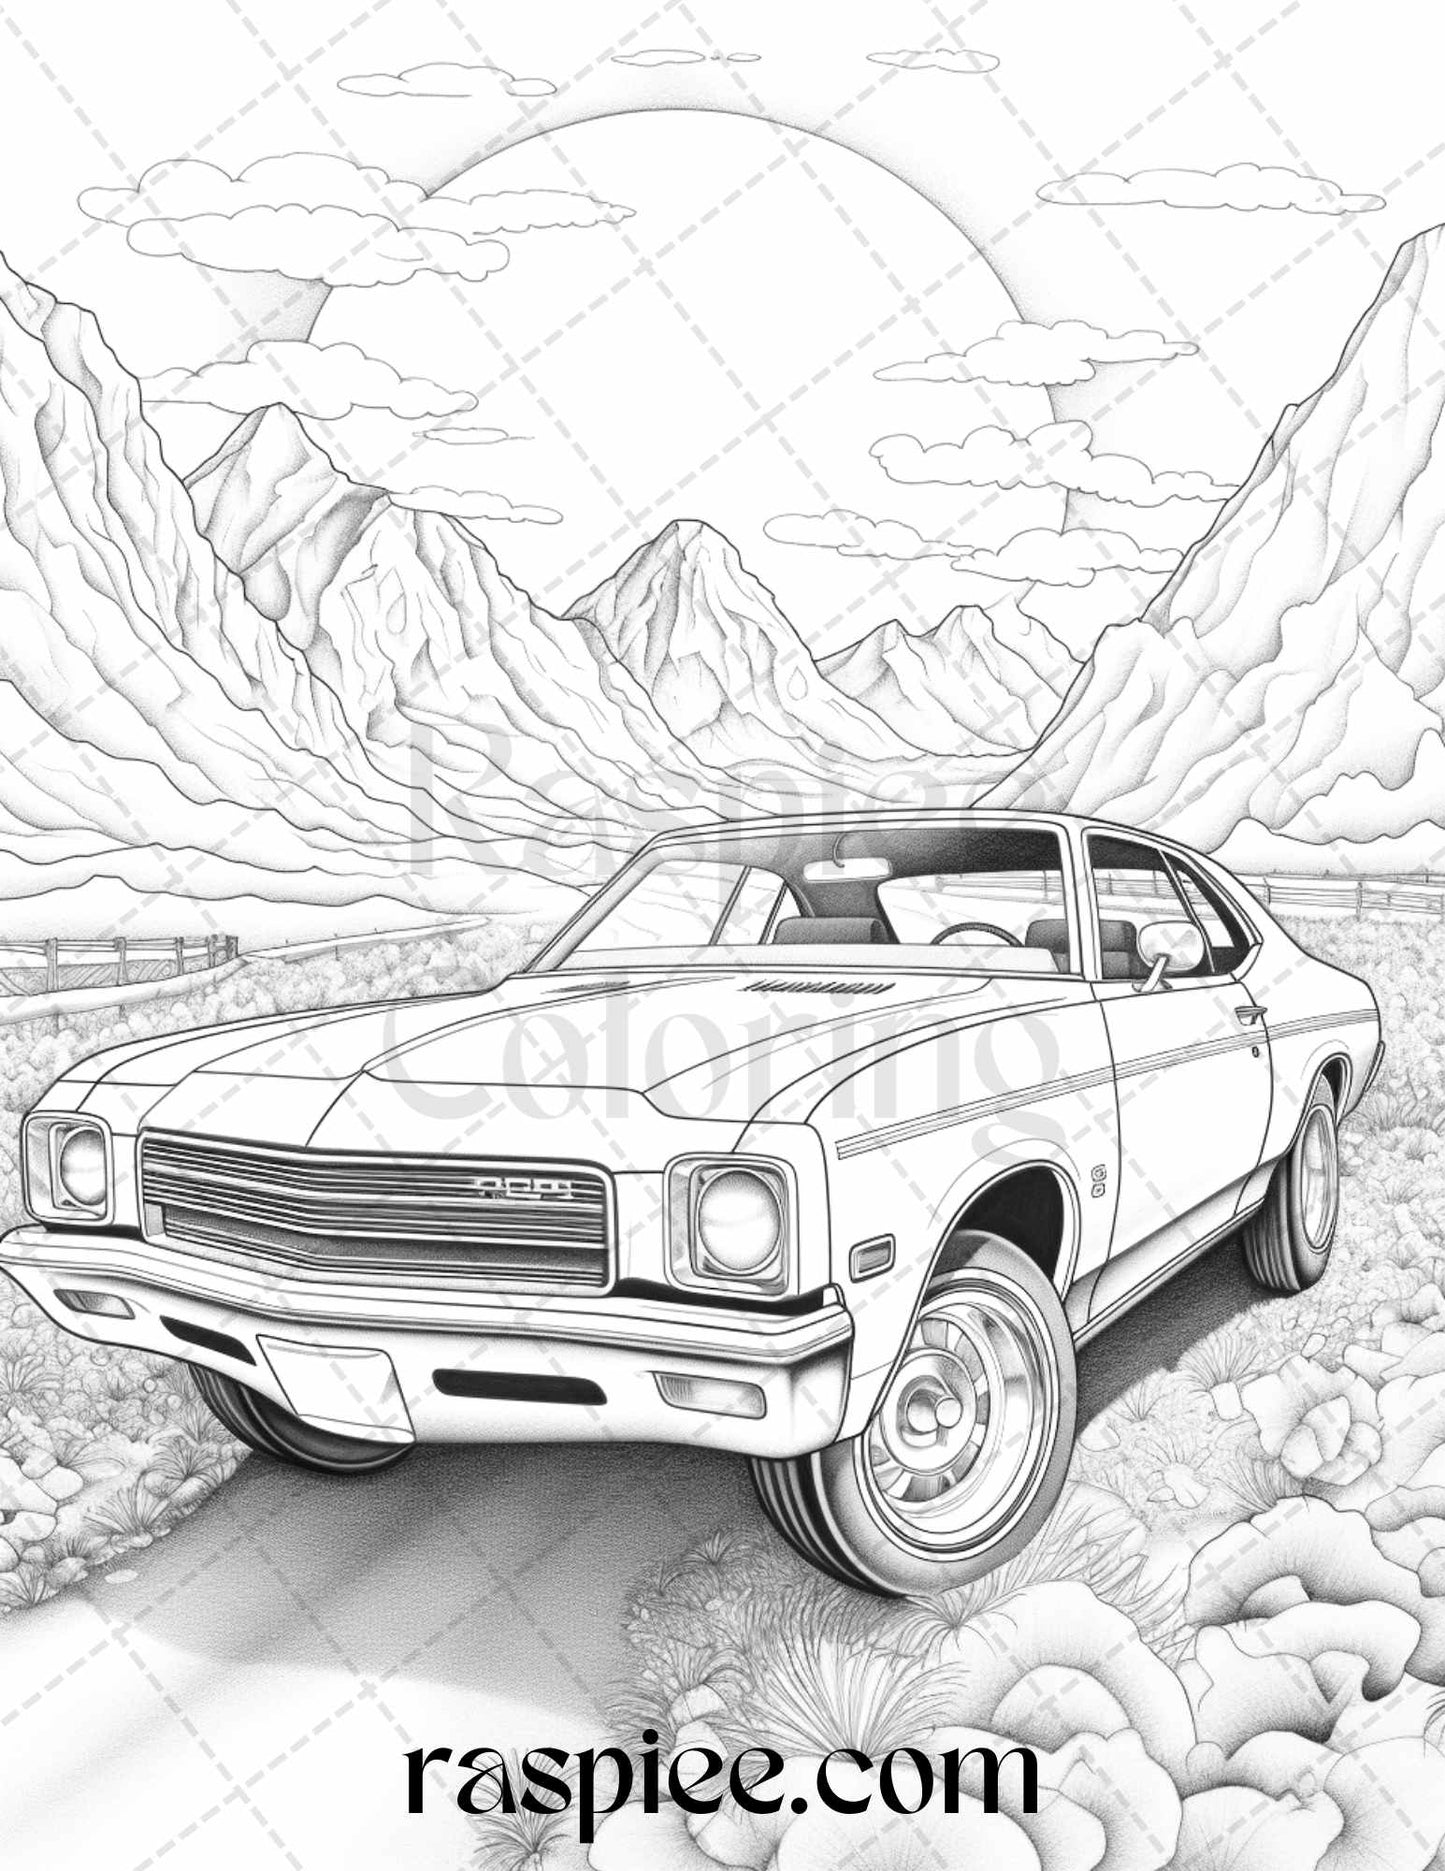 42 Vintage Cars Grayscale Coloring Pages Printable for Adults, PDF File Instant Download - raspiee